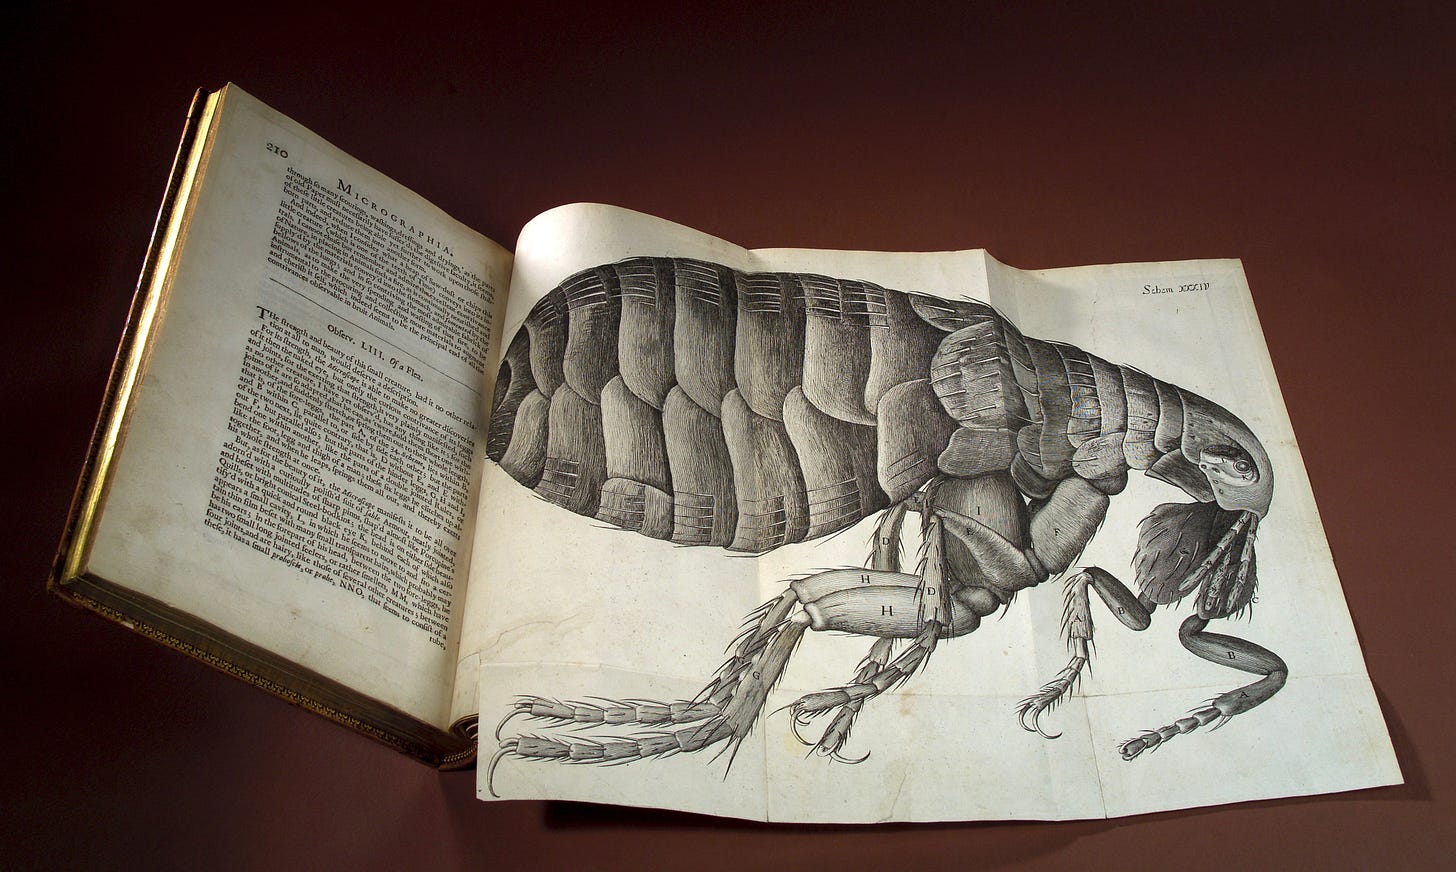 Large foldout image of a flea seen under a microscope, from Robert Hooke's Micrographia